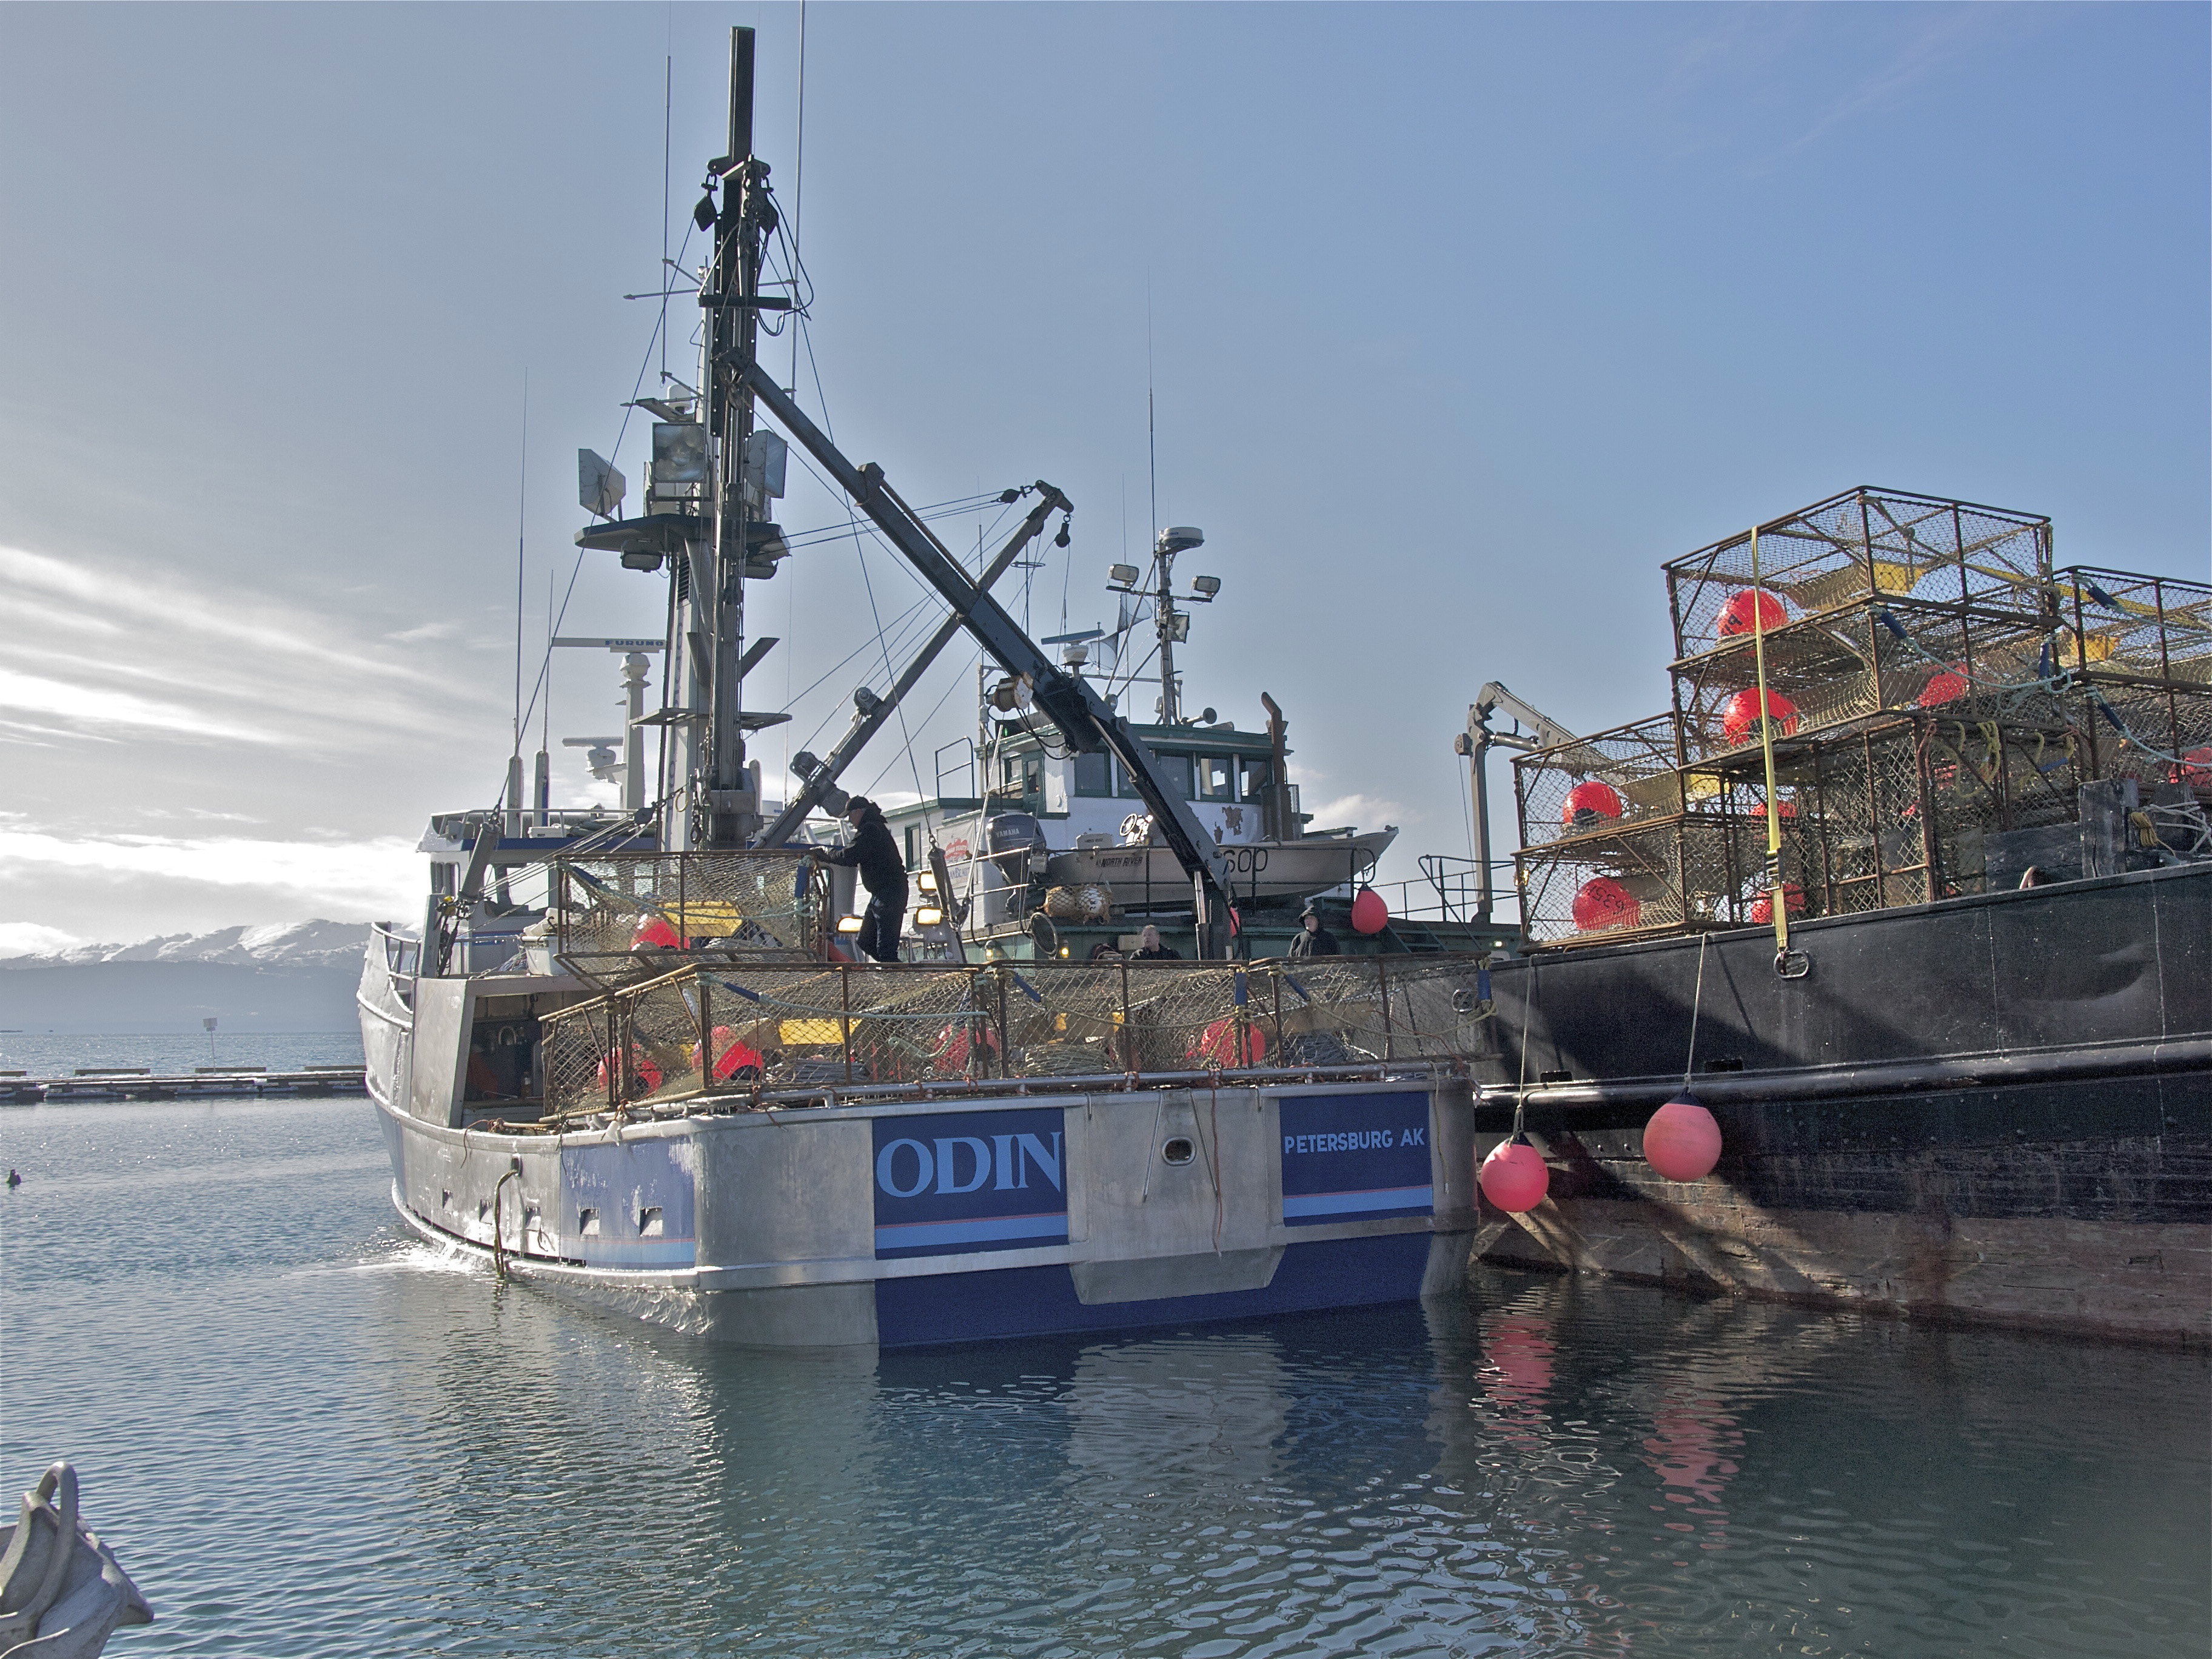 File:Odin King Crab Pots with Logger 48.jpg - Wikimedia Commons